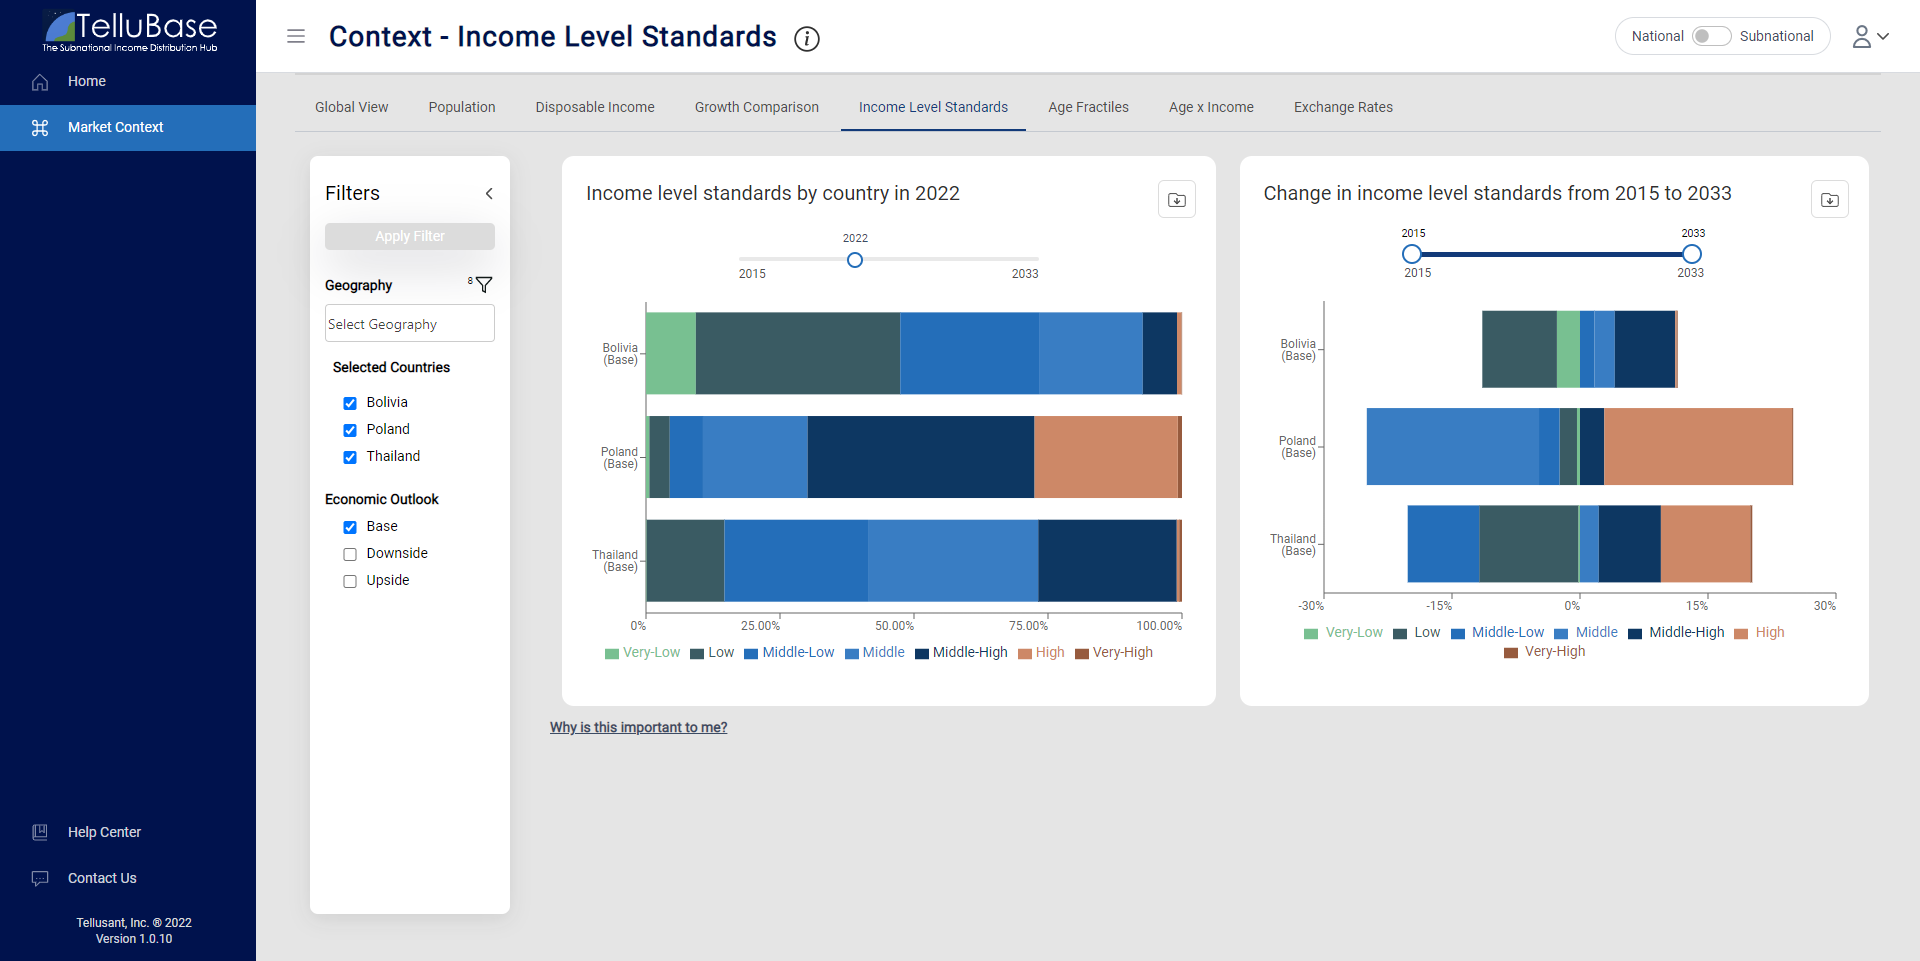 Income Level Standards (ILS) are Tellusant's globally harmonized income brackets that make it easy to directly compare populations across different countries.